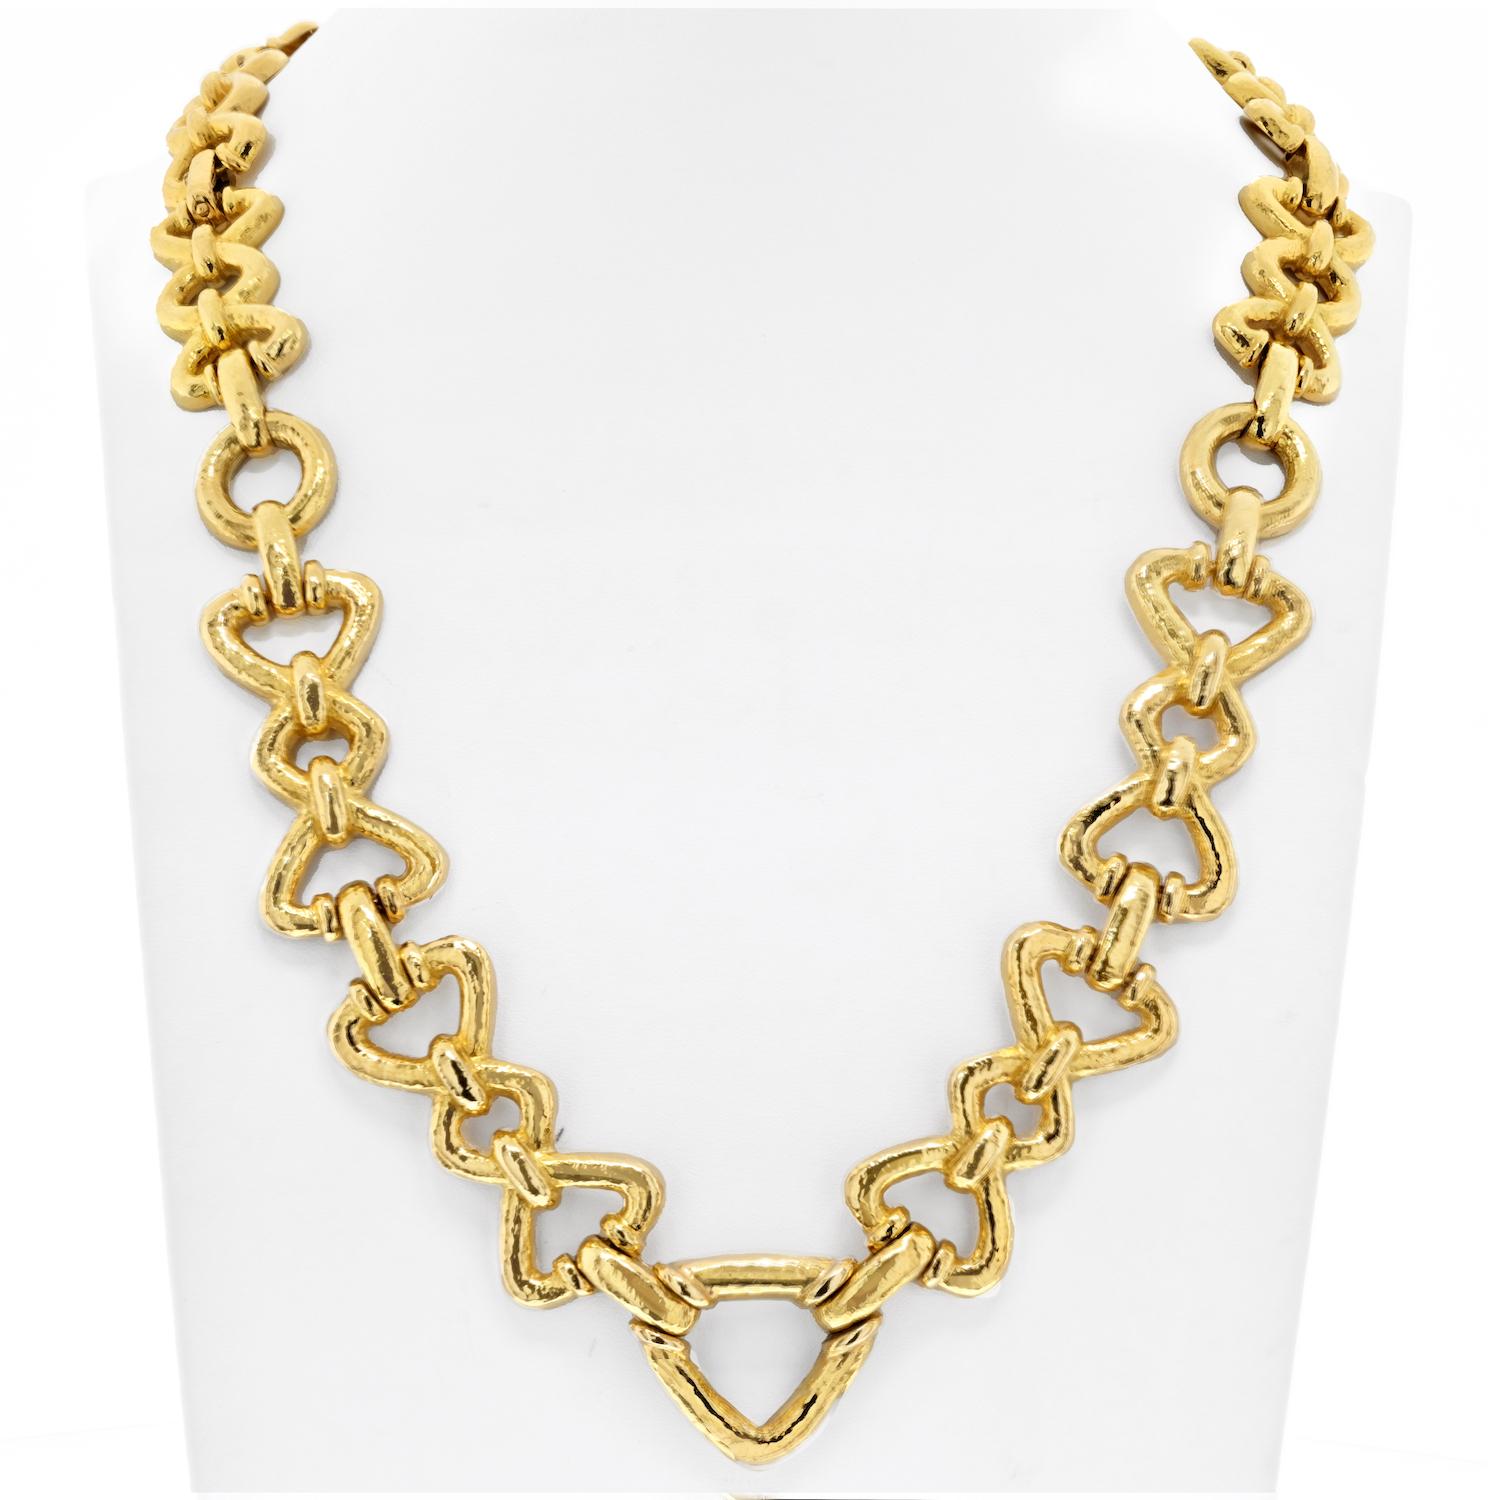 Introducing the David Webb 18K Yellow Gold Long Chain Link Necklace, a masterpiece of timeless elegance and versatility. Crafted with meticulous attention to detail, this exquisite necklace features a series of hammered and high-polished chain